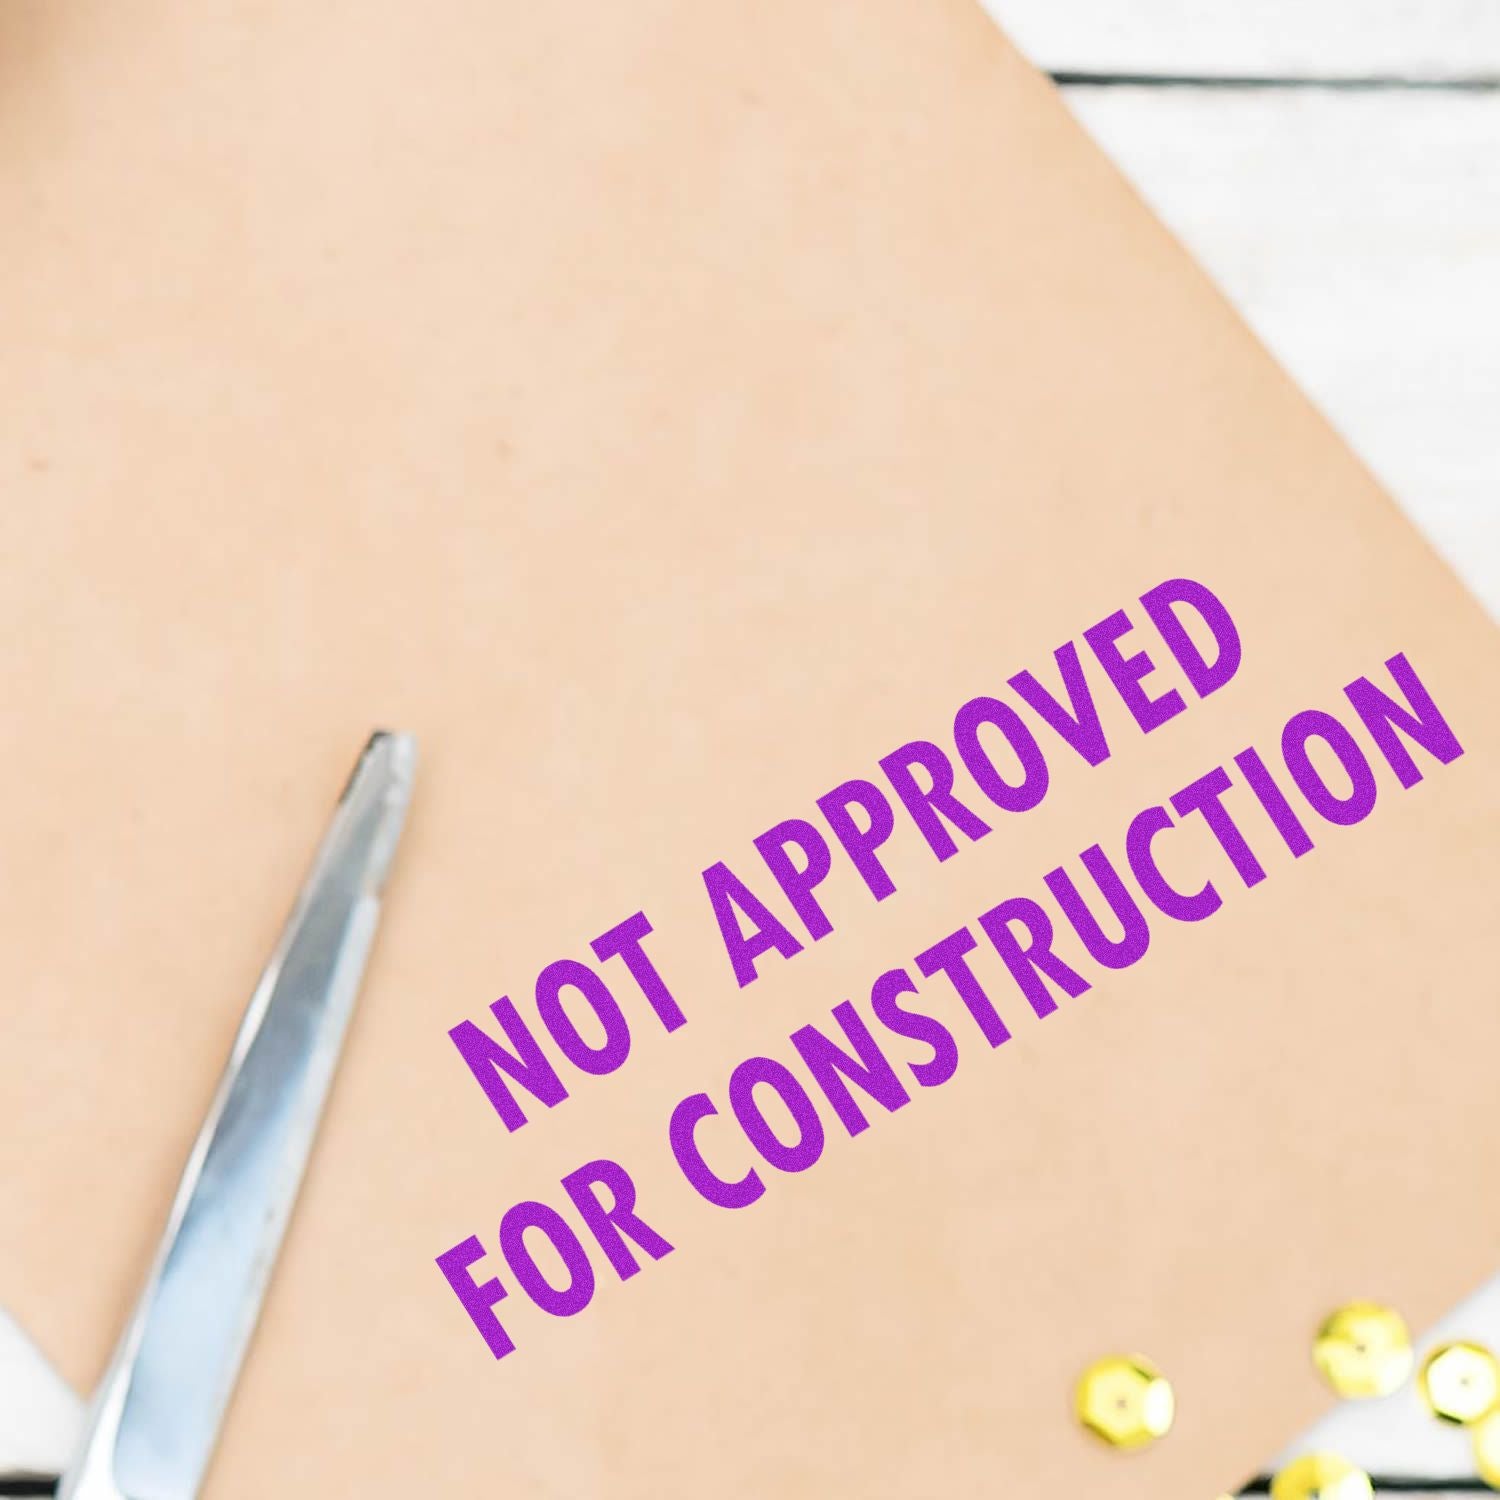 Not Approved For Construction Rubber Stamp In Use